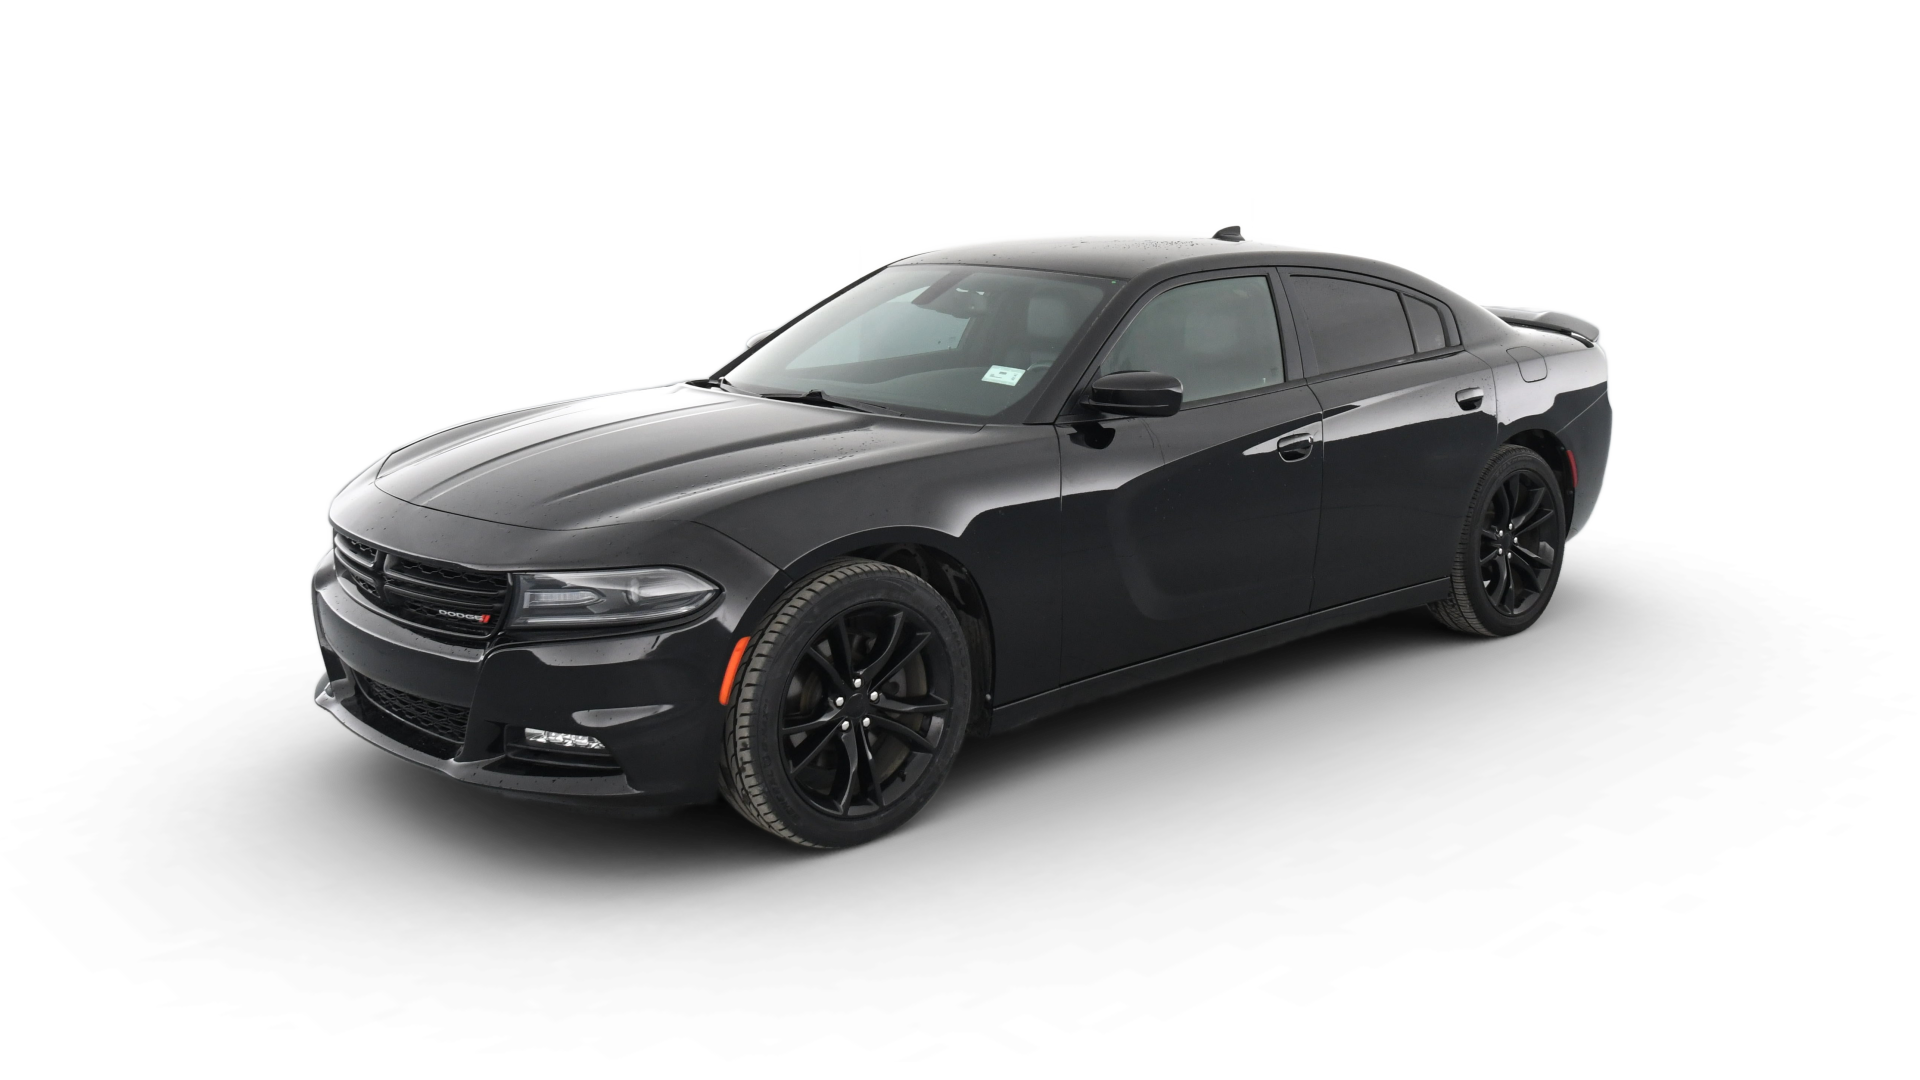 Used 2016 Dodge Charger For Sale Online | Carvana